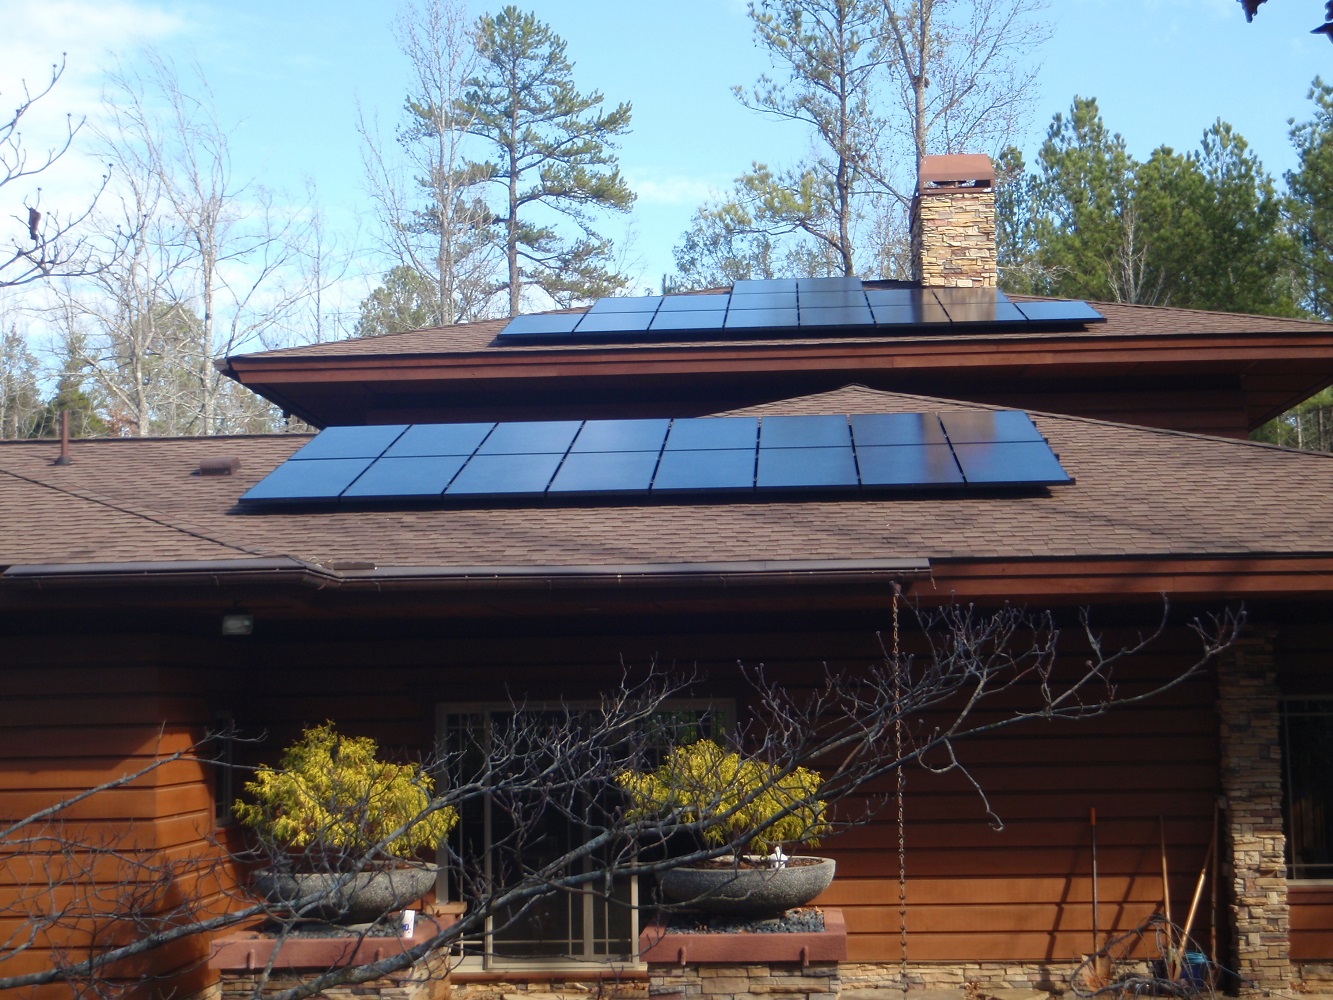 Picture of a Cabin with Solar Panels